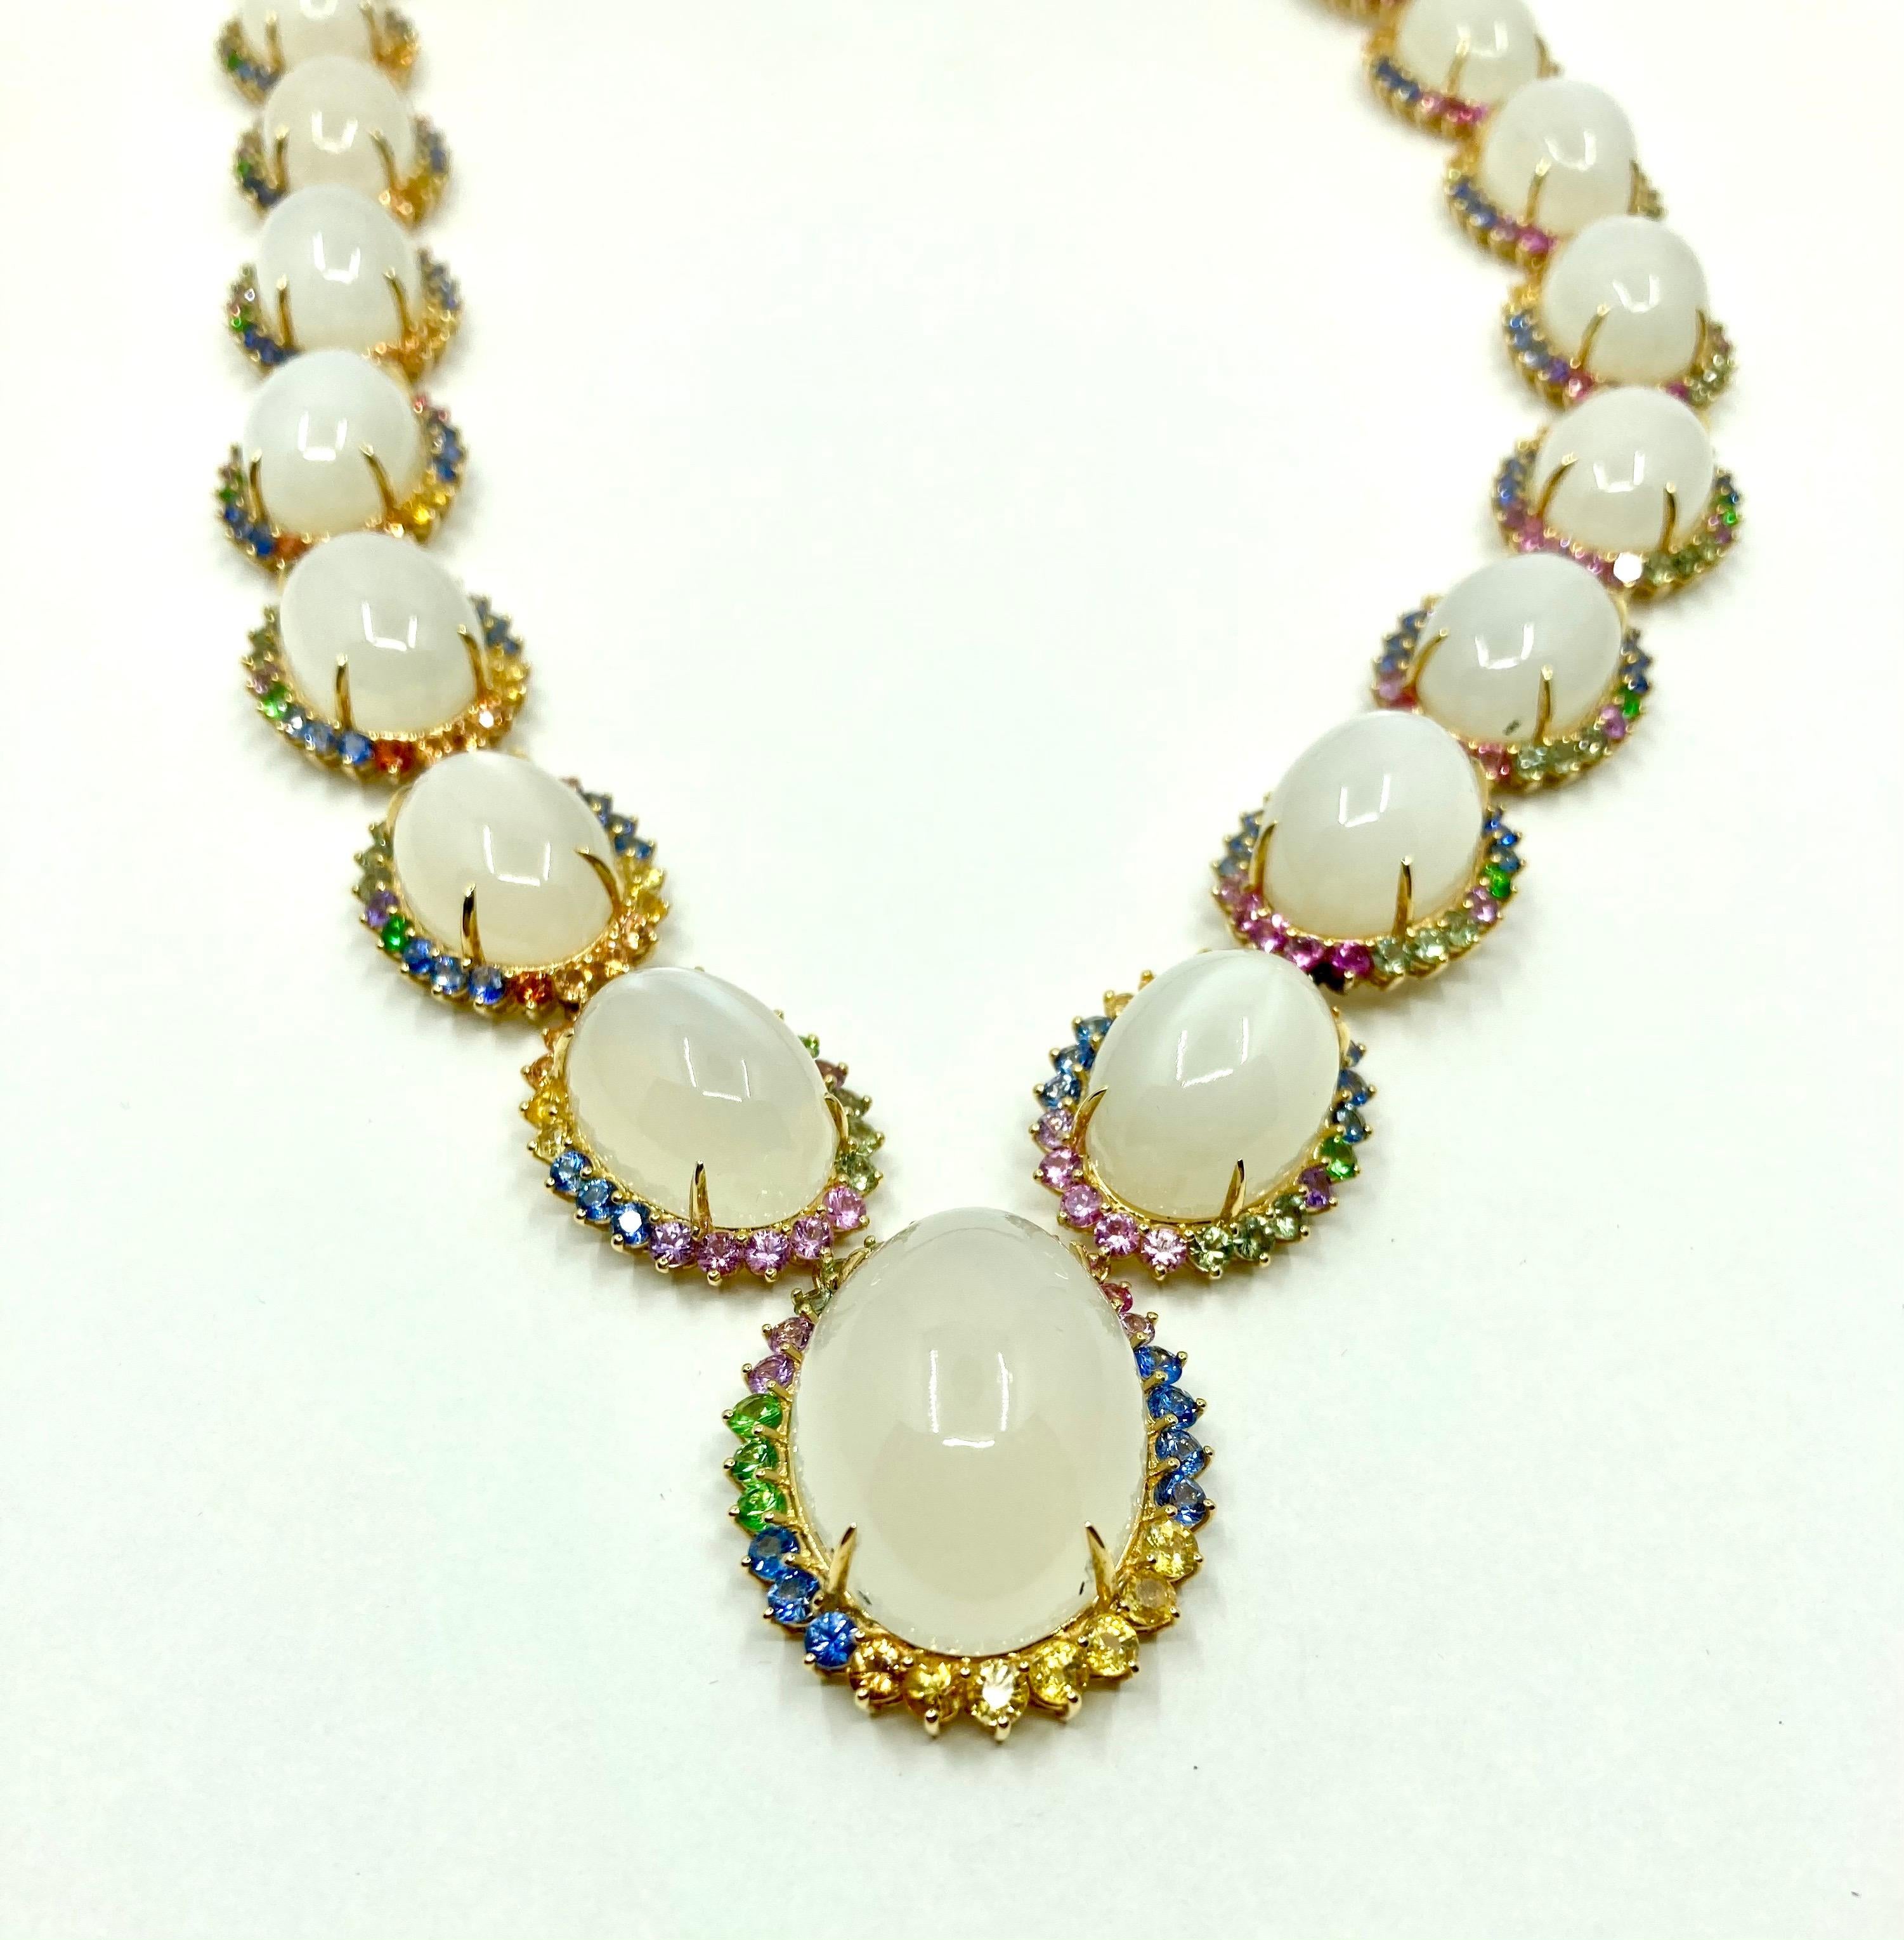 Timeless elengat Yellow Gold Necklace with Multicolor Sappires (blue, green, yellow, purple) ct. 38.04, Tsavorite ct. 1.62 and White Moonstone ct. 311.25 , Made in Italy by Roberto Casarin.

A simple yet refined design, this necklace is perfect for